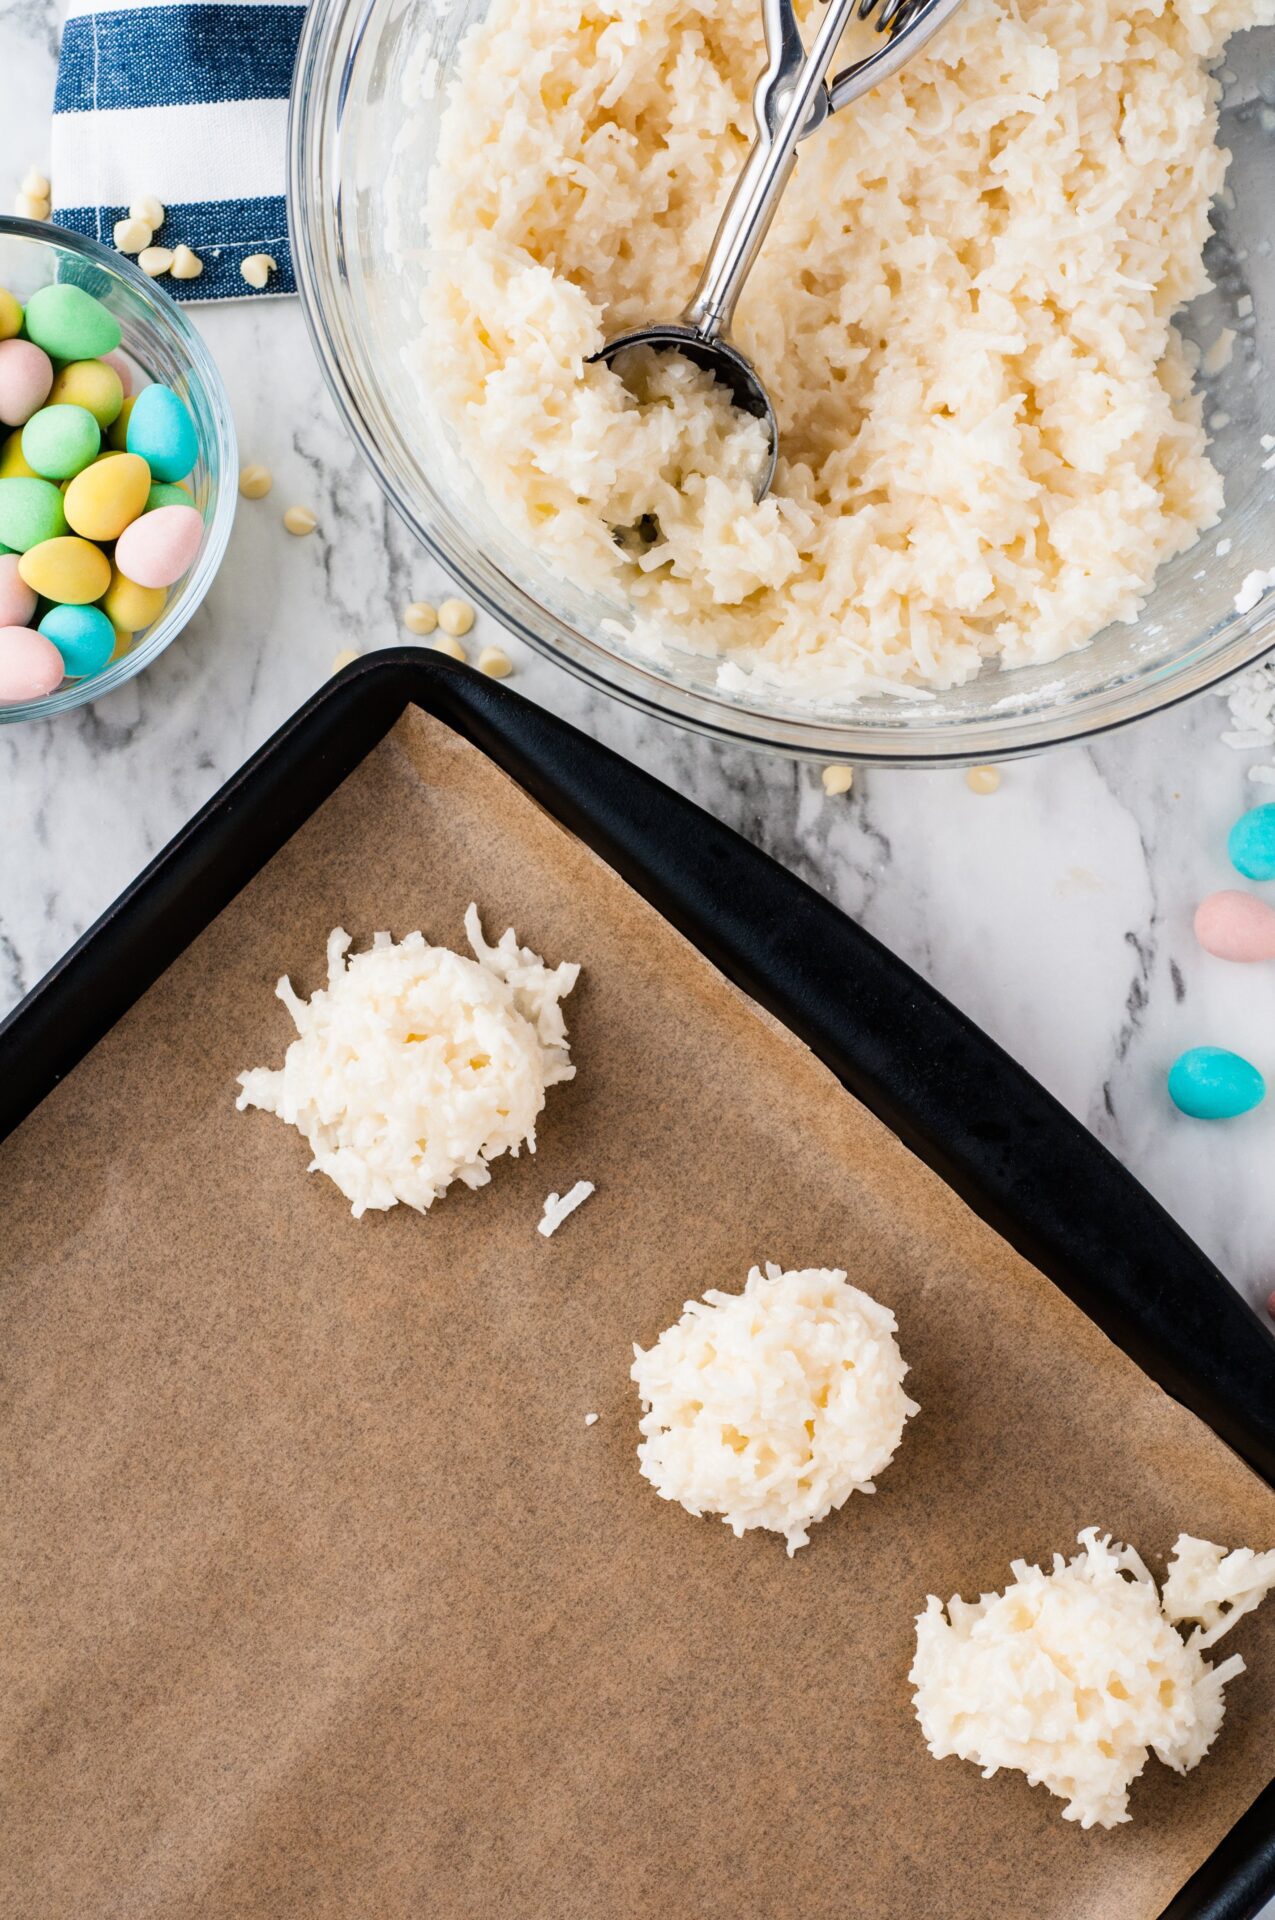 Make your Easter extra special with these Coconut Macaroon Easter Nests. These adorable macaroon nests are both adorable and delicious!